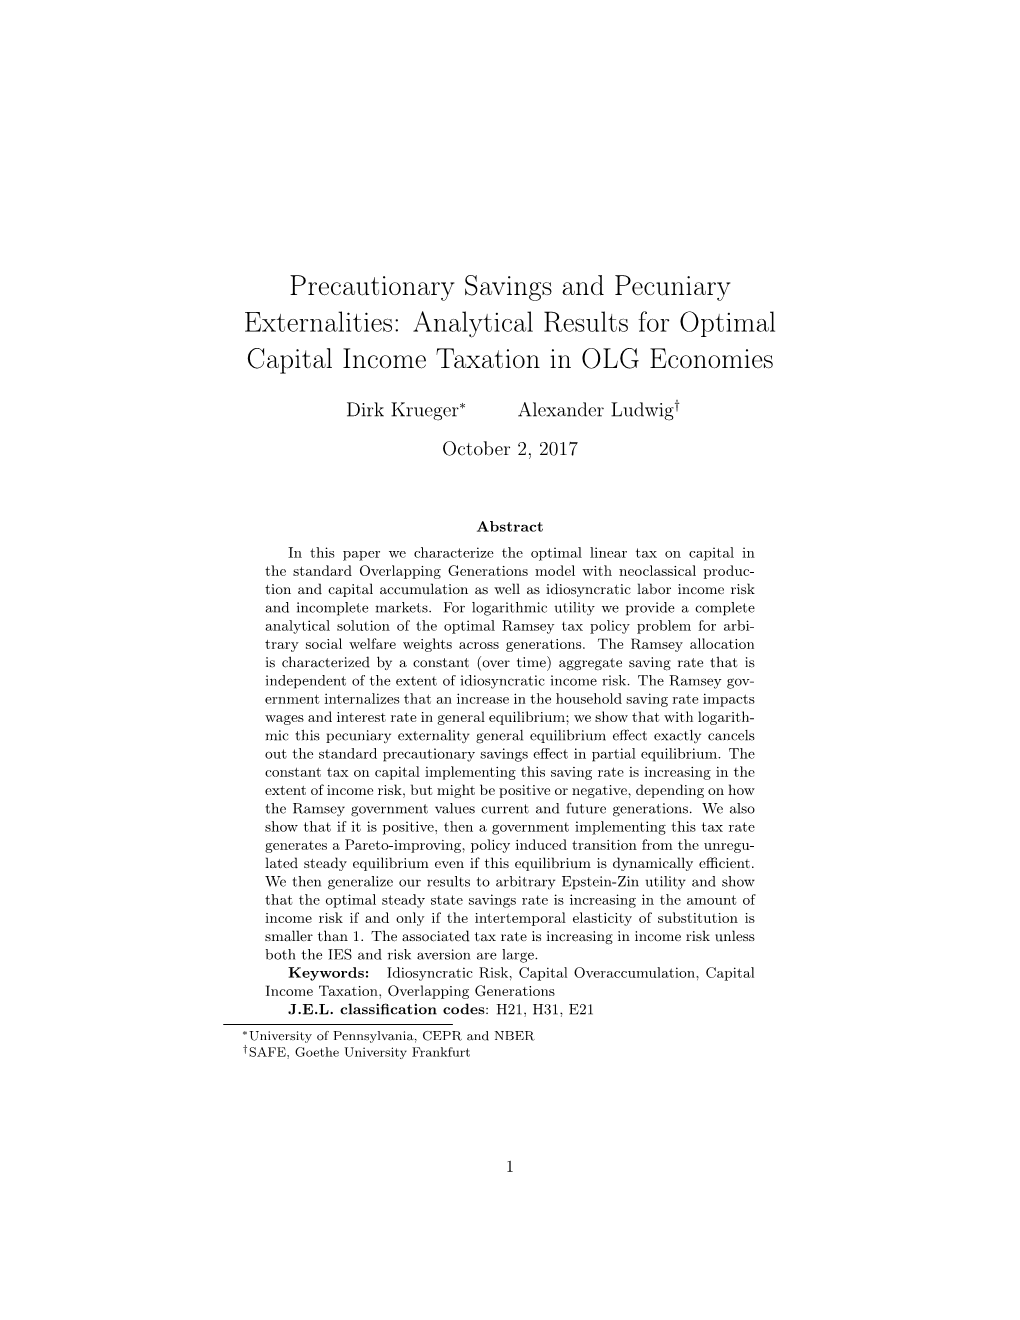 Precautionary Savings and Pecuniary Externalities: Analytical Results for Optimal Capital Income Taxation in OLG Economies